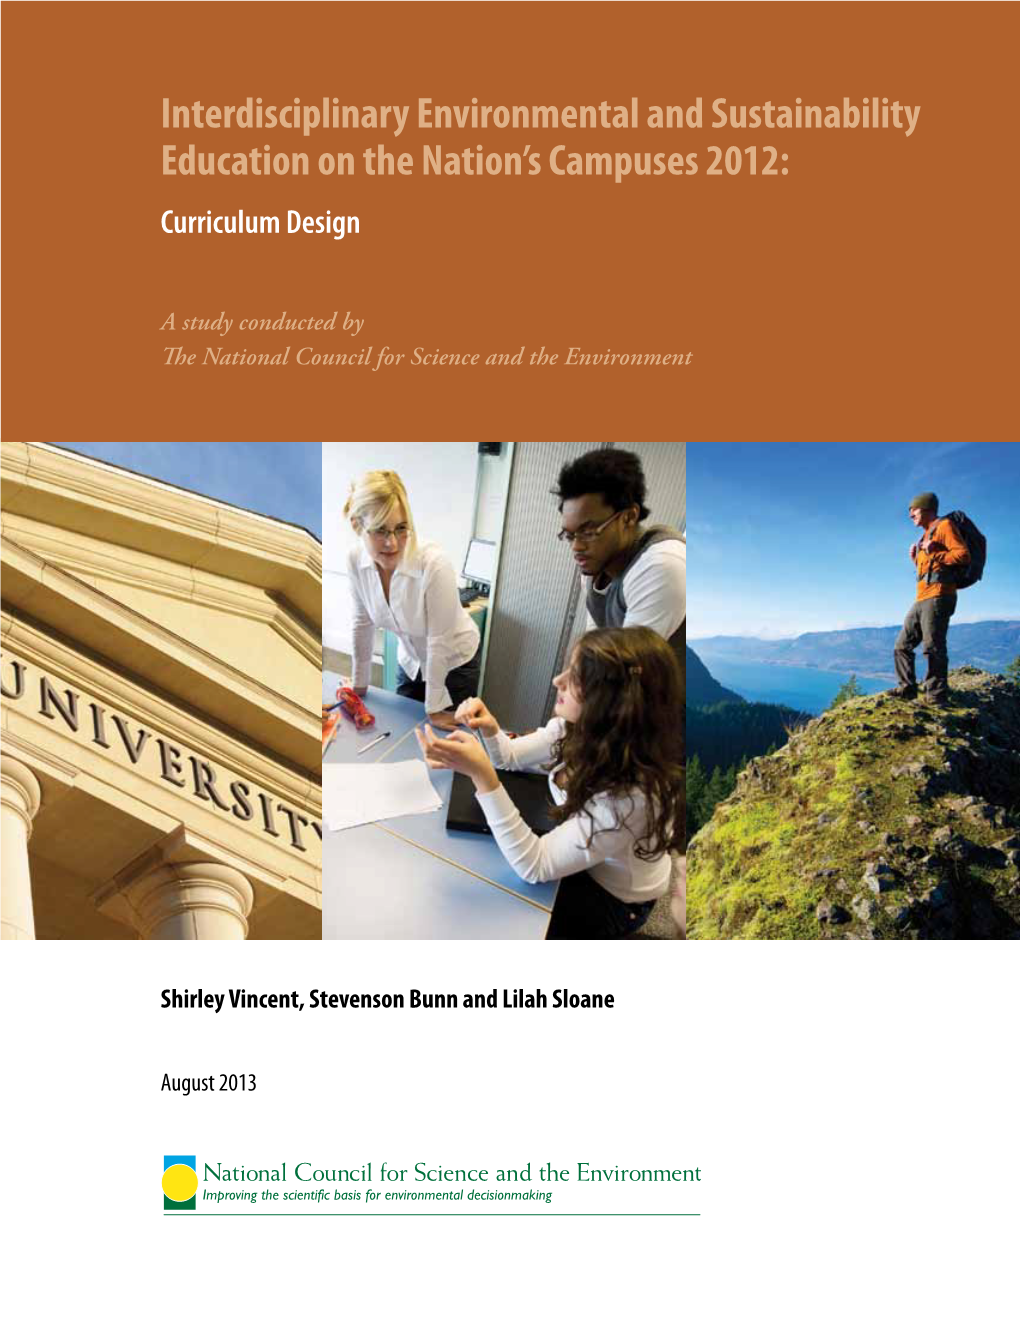 Interdisciplinary Environmental and Sustainability Education on the Nation's Campuses 2012